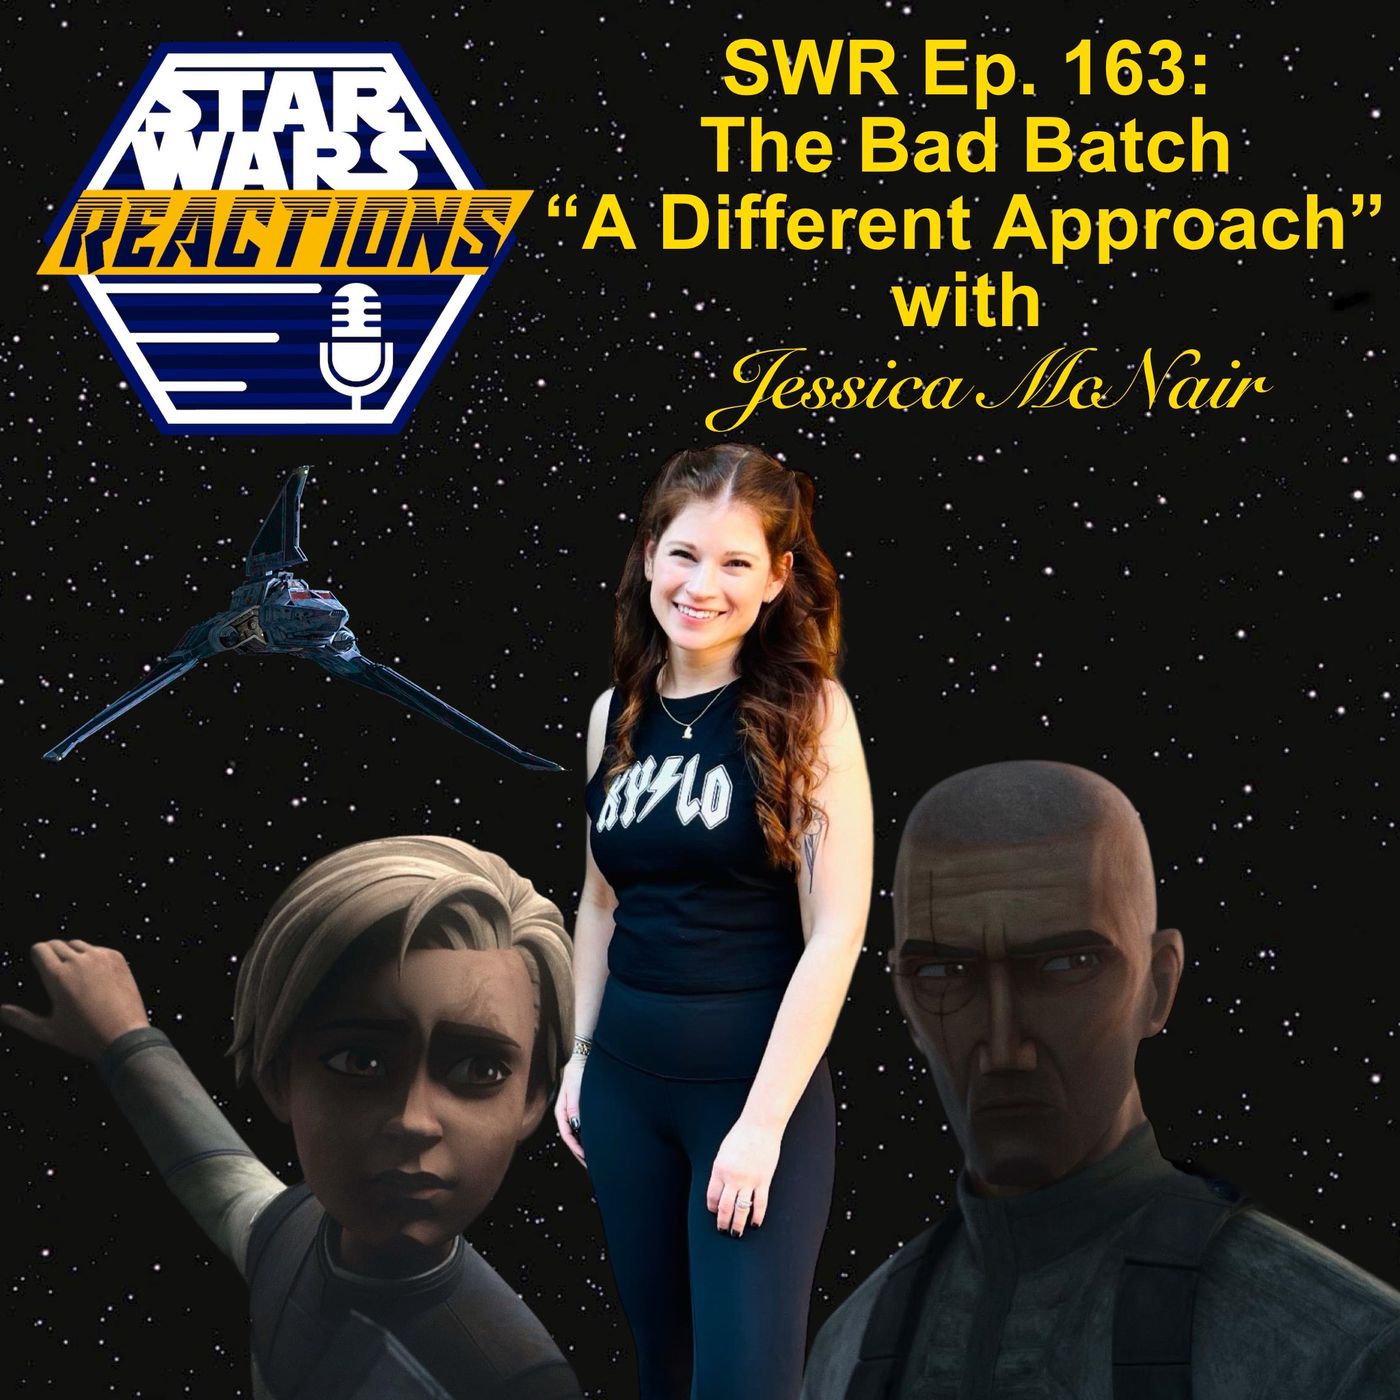 SWR Ep. 163: The Bad Batch "A Different Approach" with Jessica McNair